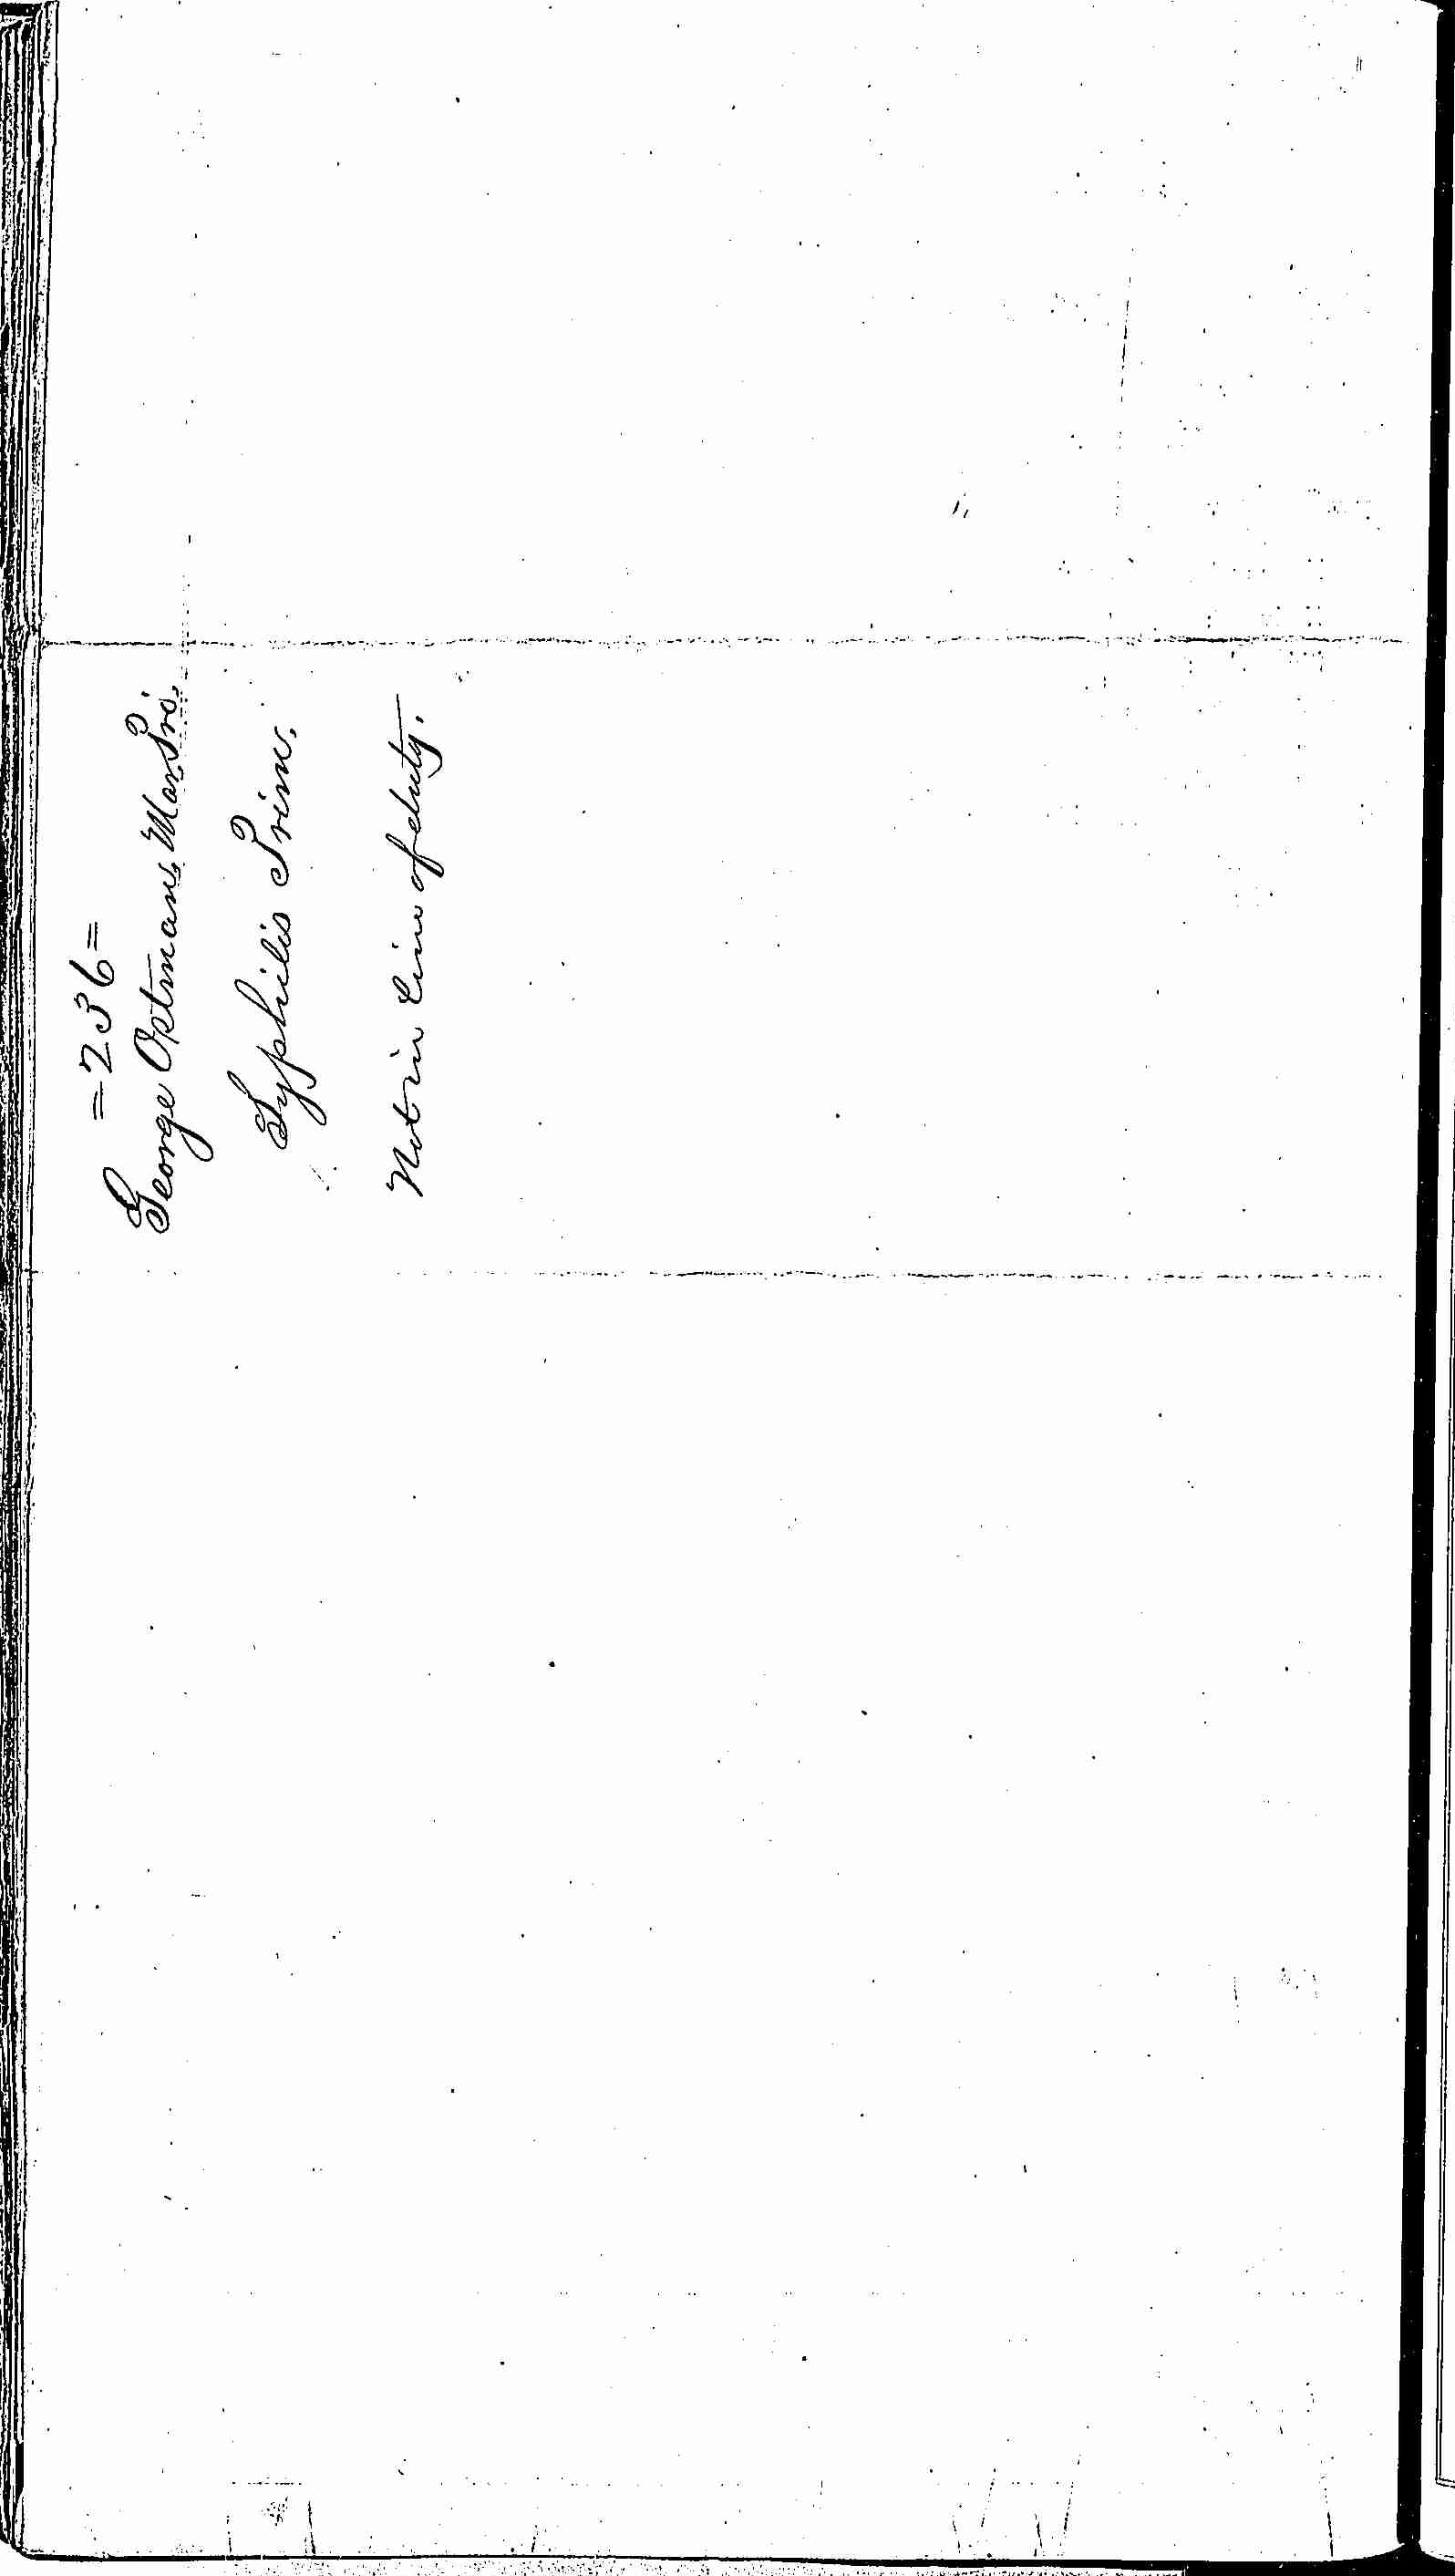 Entry for George Ostman (second admission page 2 of 2) in the log Hospital Tickets and Case Papers - Naval Hospital - Washington, D.C. - 1866-68